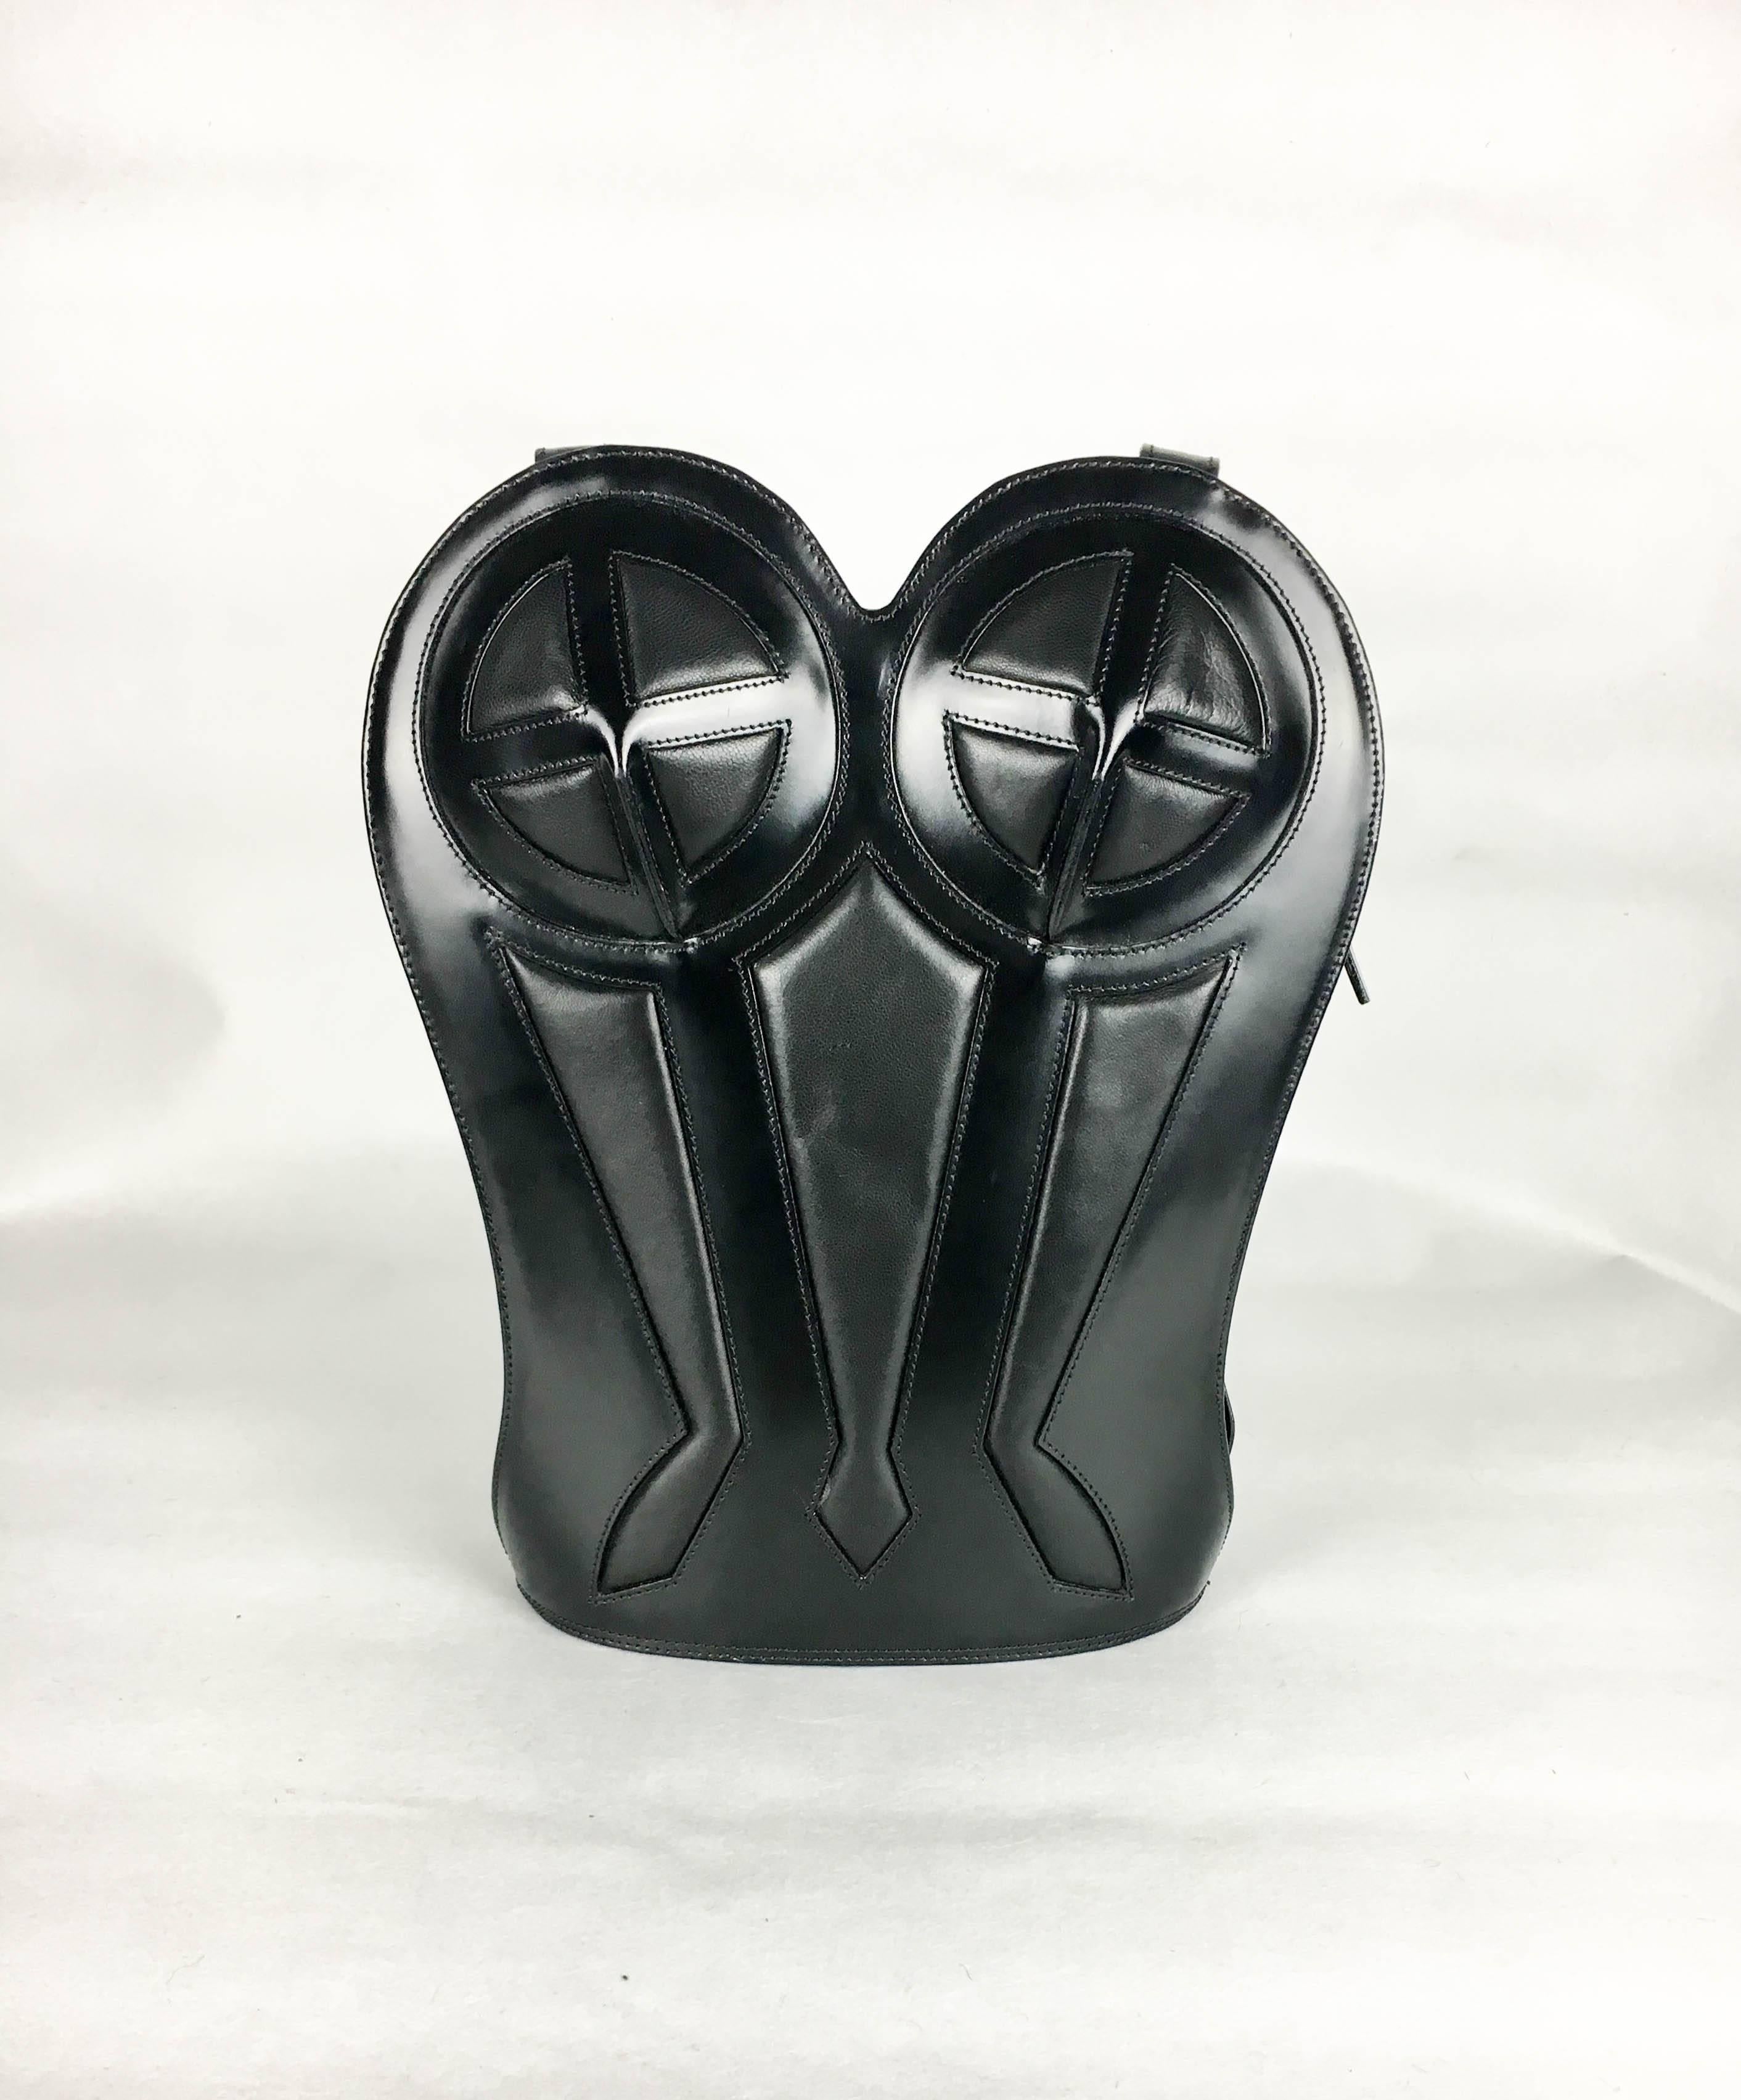 Vintage Jean Paul Gaultier Black Leather Bustier Backpack. This fabulous piece by Gaultier dates back from 1998. It has black hardshell shiny leather exterior and fabric lined interior. The design is inspired by the iconic bustier by Gaultier that